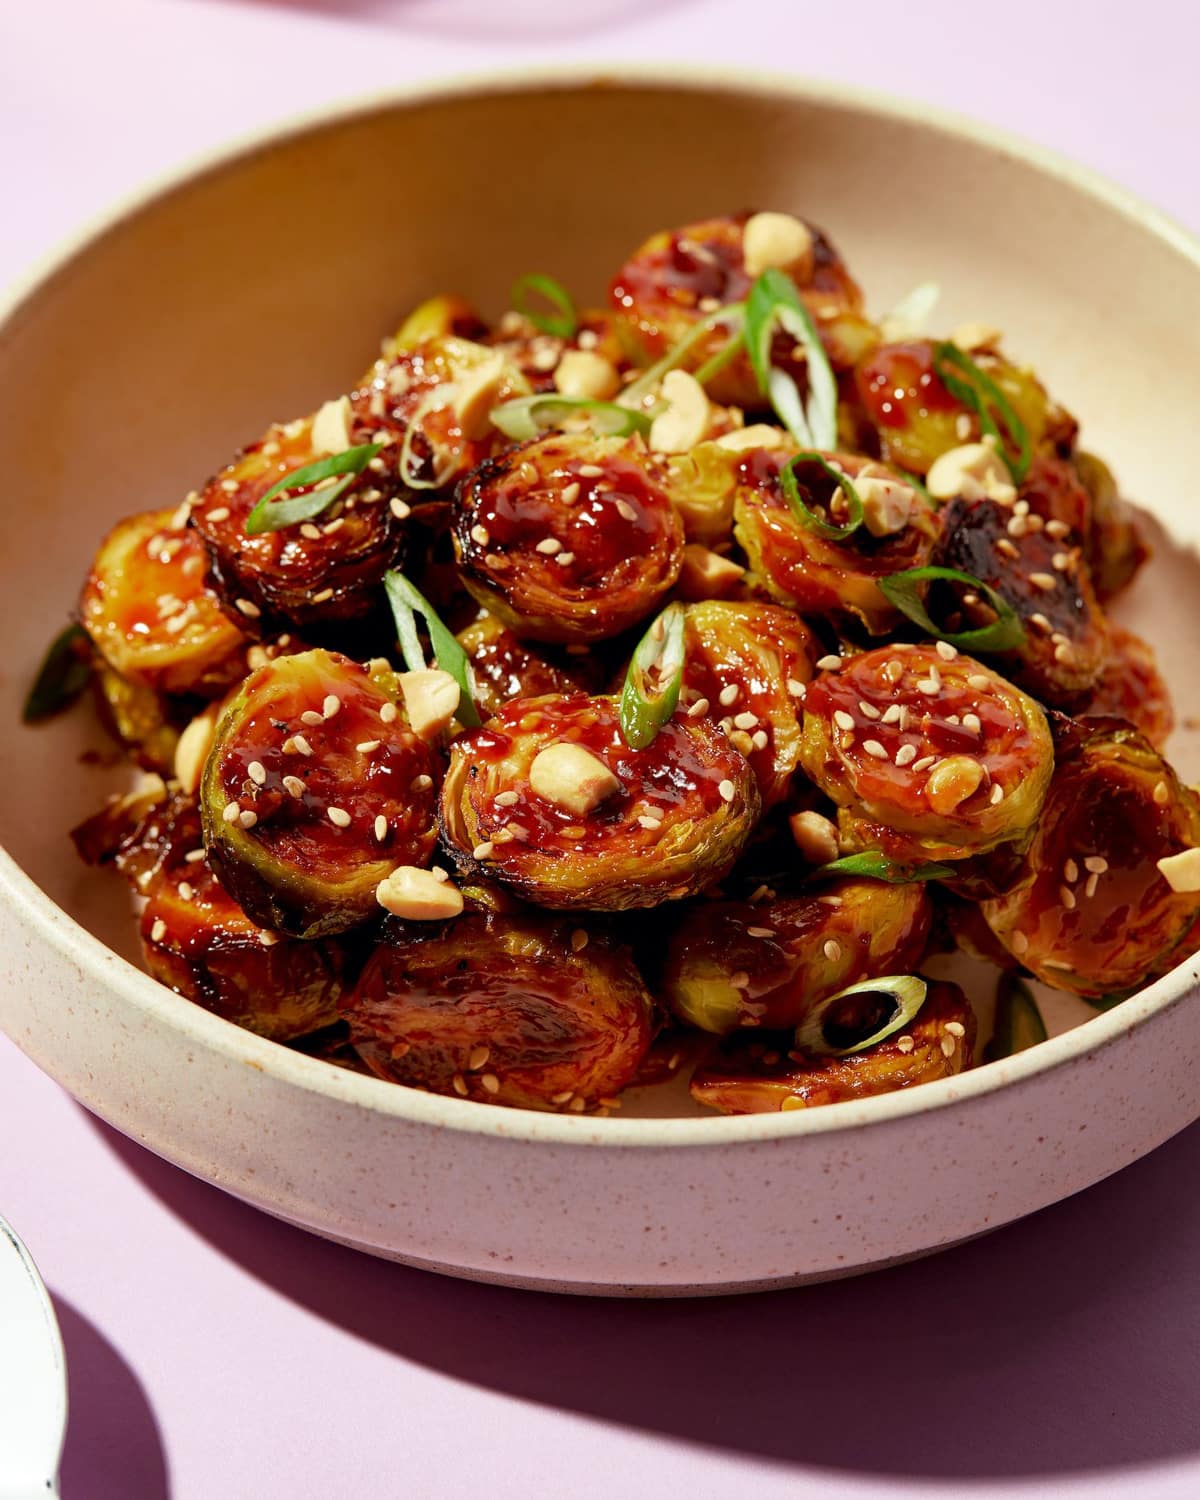 Kung pao brussels sprouts